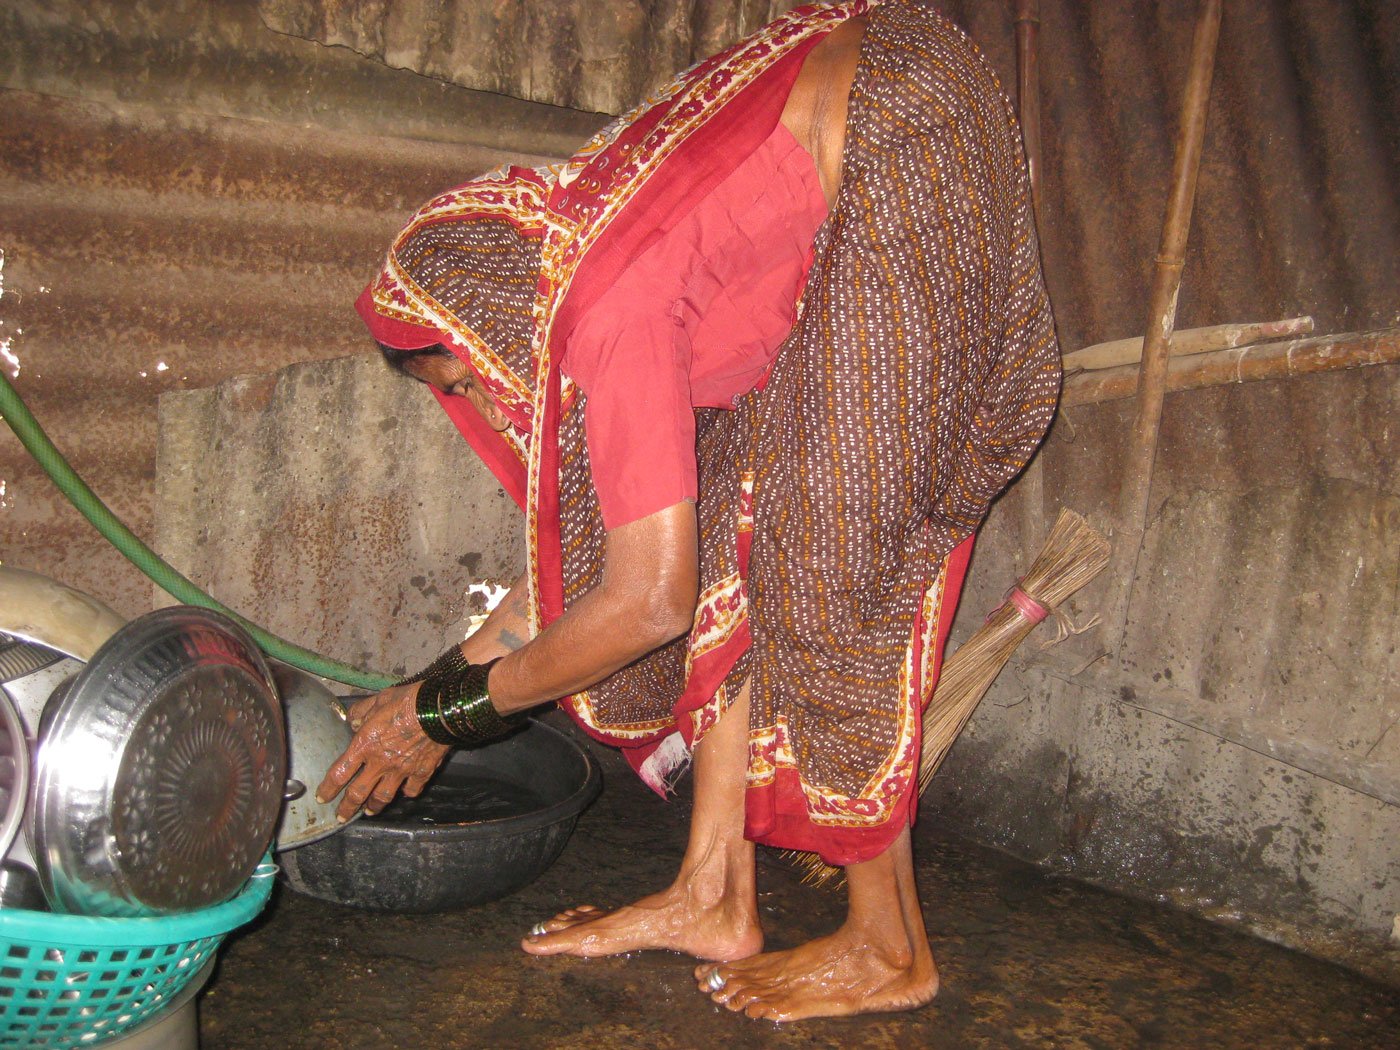 Bibabai resumed strenuous farm labour soon after a hysterectomy, with no belt to support her abdominal muscles

